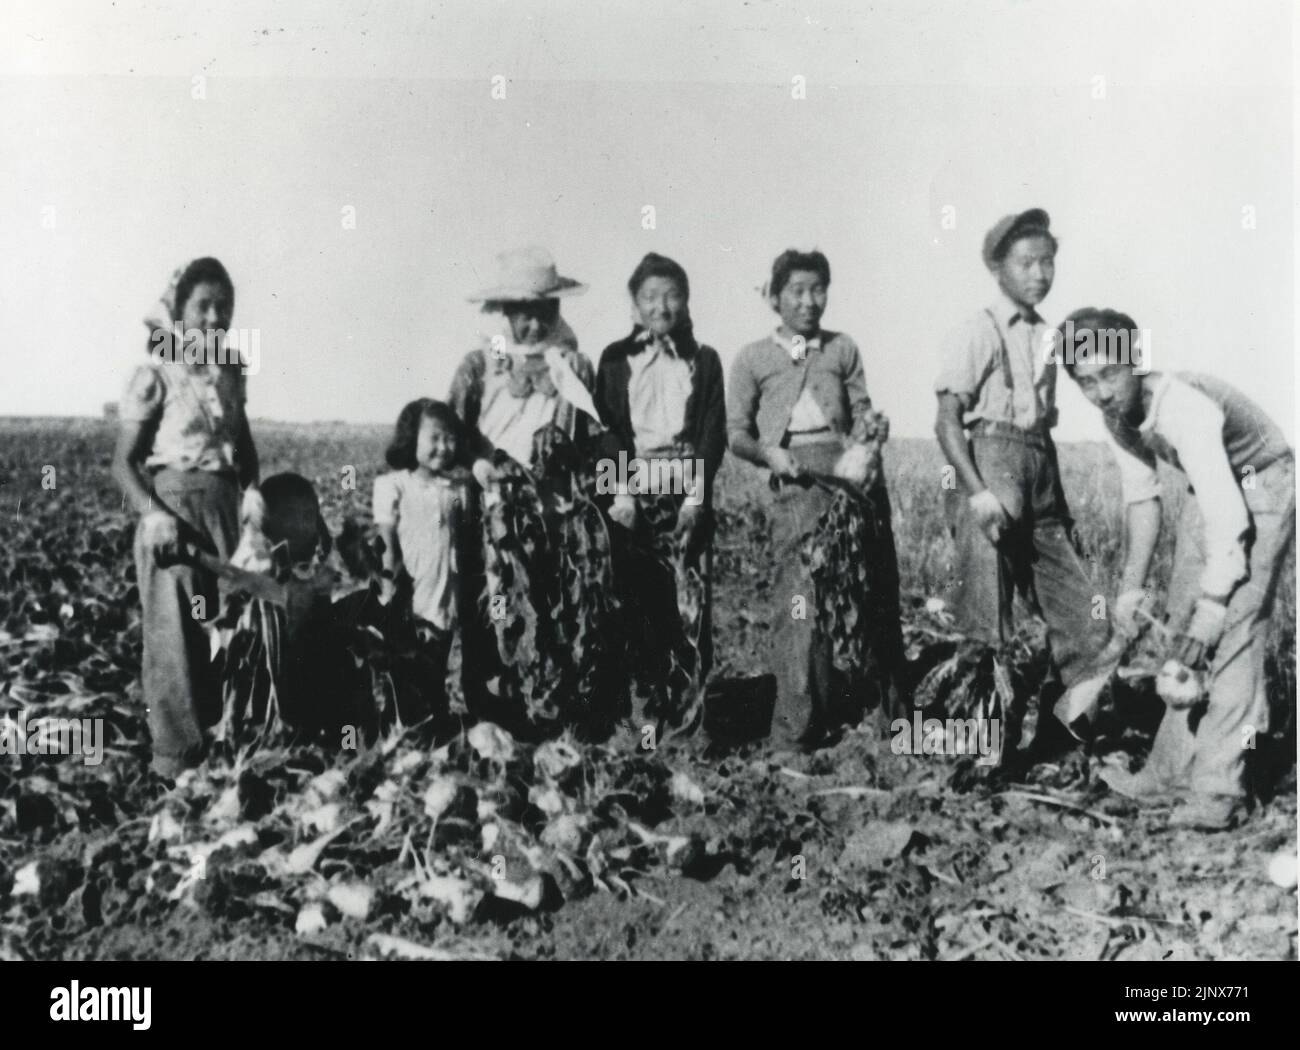 Title: Niwatsukino family working on farm in Turin, Alberta  Reminder: Reminder: No known copyright restrictions. Please credit UBC Library as the image source. For more information see http://digitalcollections.library.ubc.ca/cdm/about.   Date: 1942  Access Identifier: JCPC  25 090  Source: Original Format: University of British Columbia Library. Rare Books are Special Collections. Japanese Canadian Research Collection. JCPC  25 090  Permanent URL: http://digitalcollections.library.ubc.ca/cdm/ref/collection/jphotos/id/291 Stock Photo